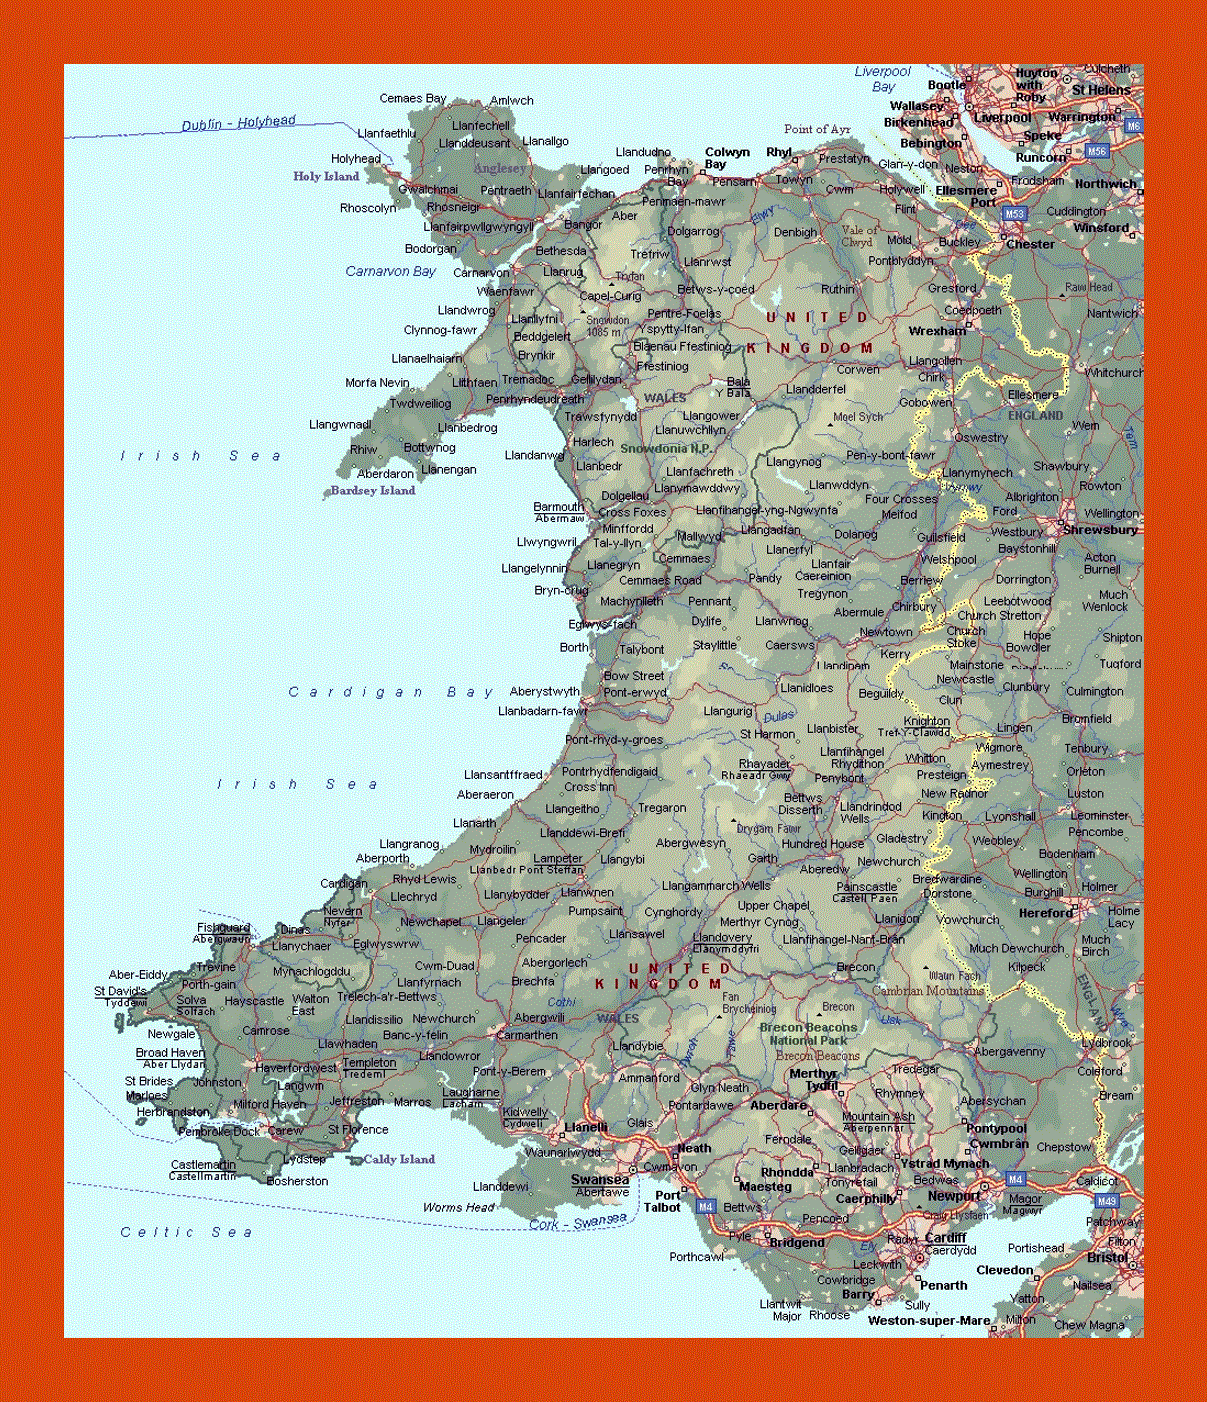 Elevation map of Wales